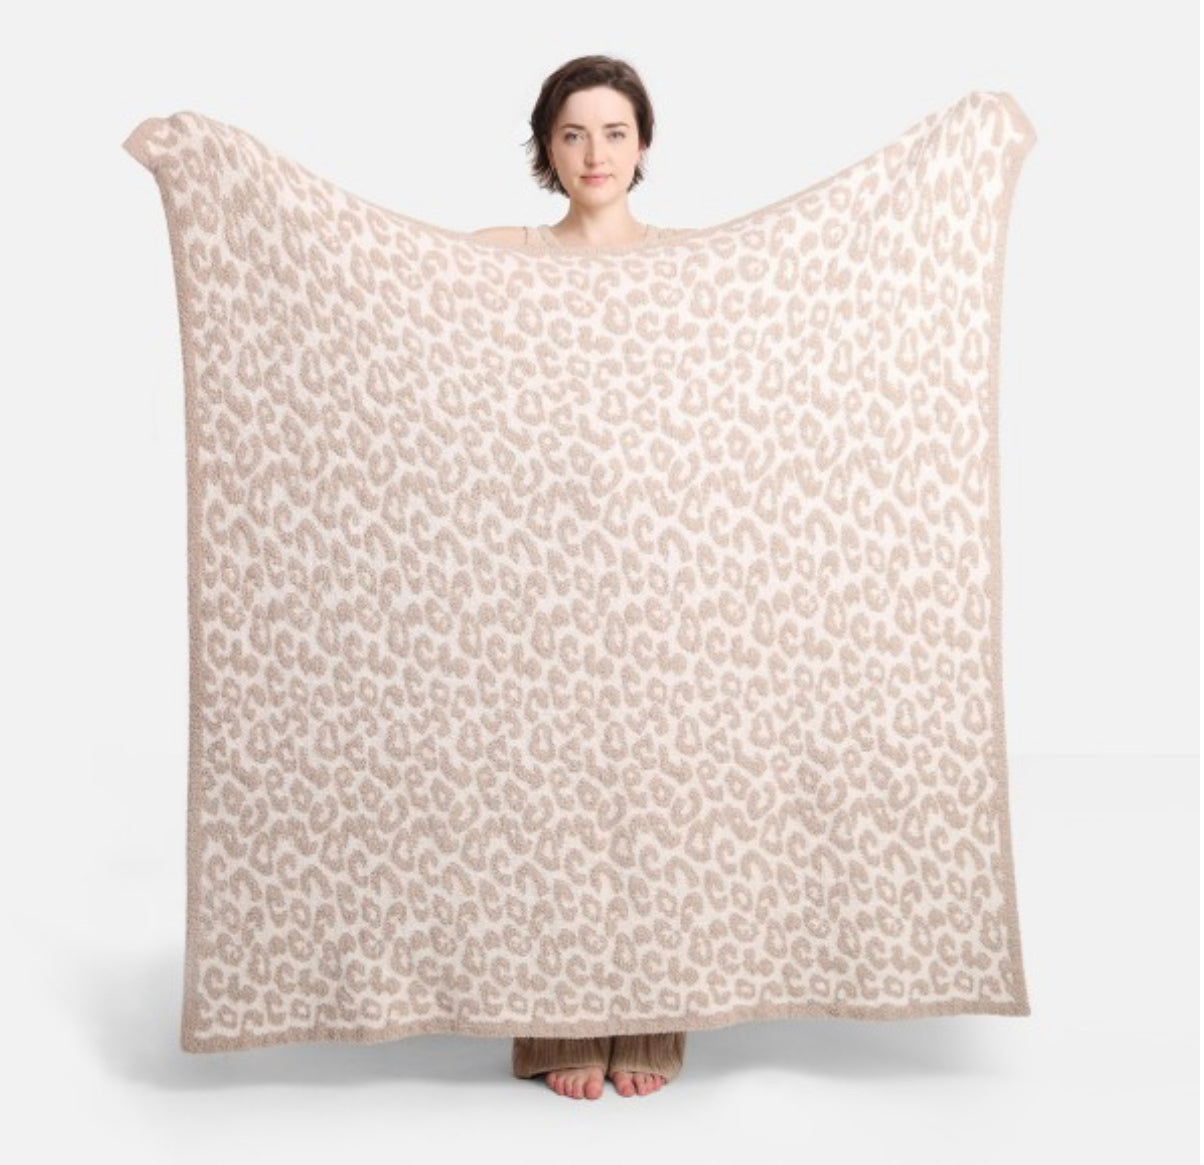 Jacquard Animal Print Comfy Luxe Knit Blanket